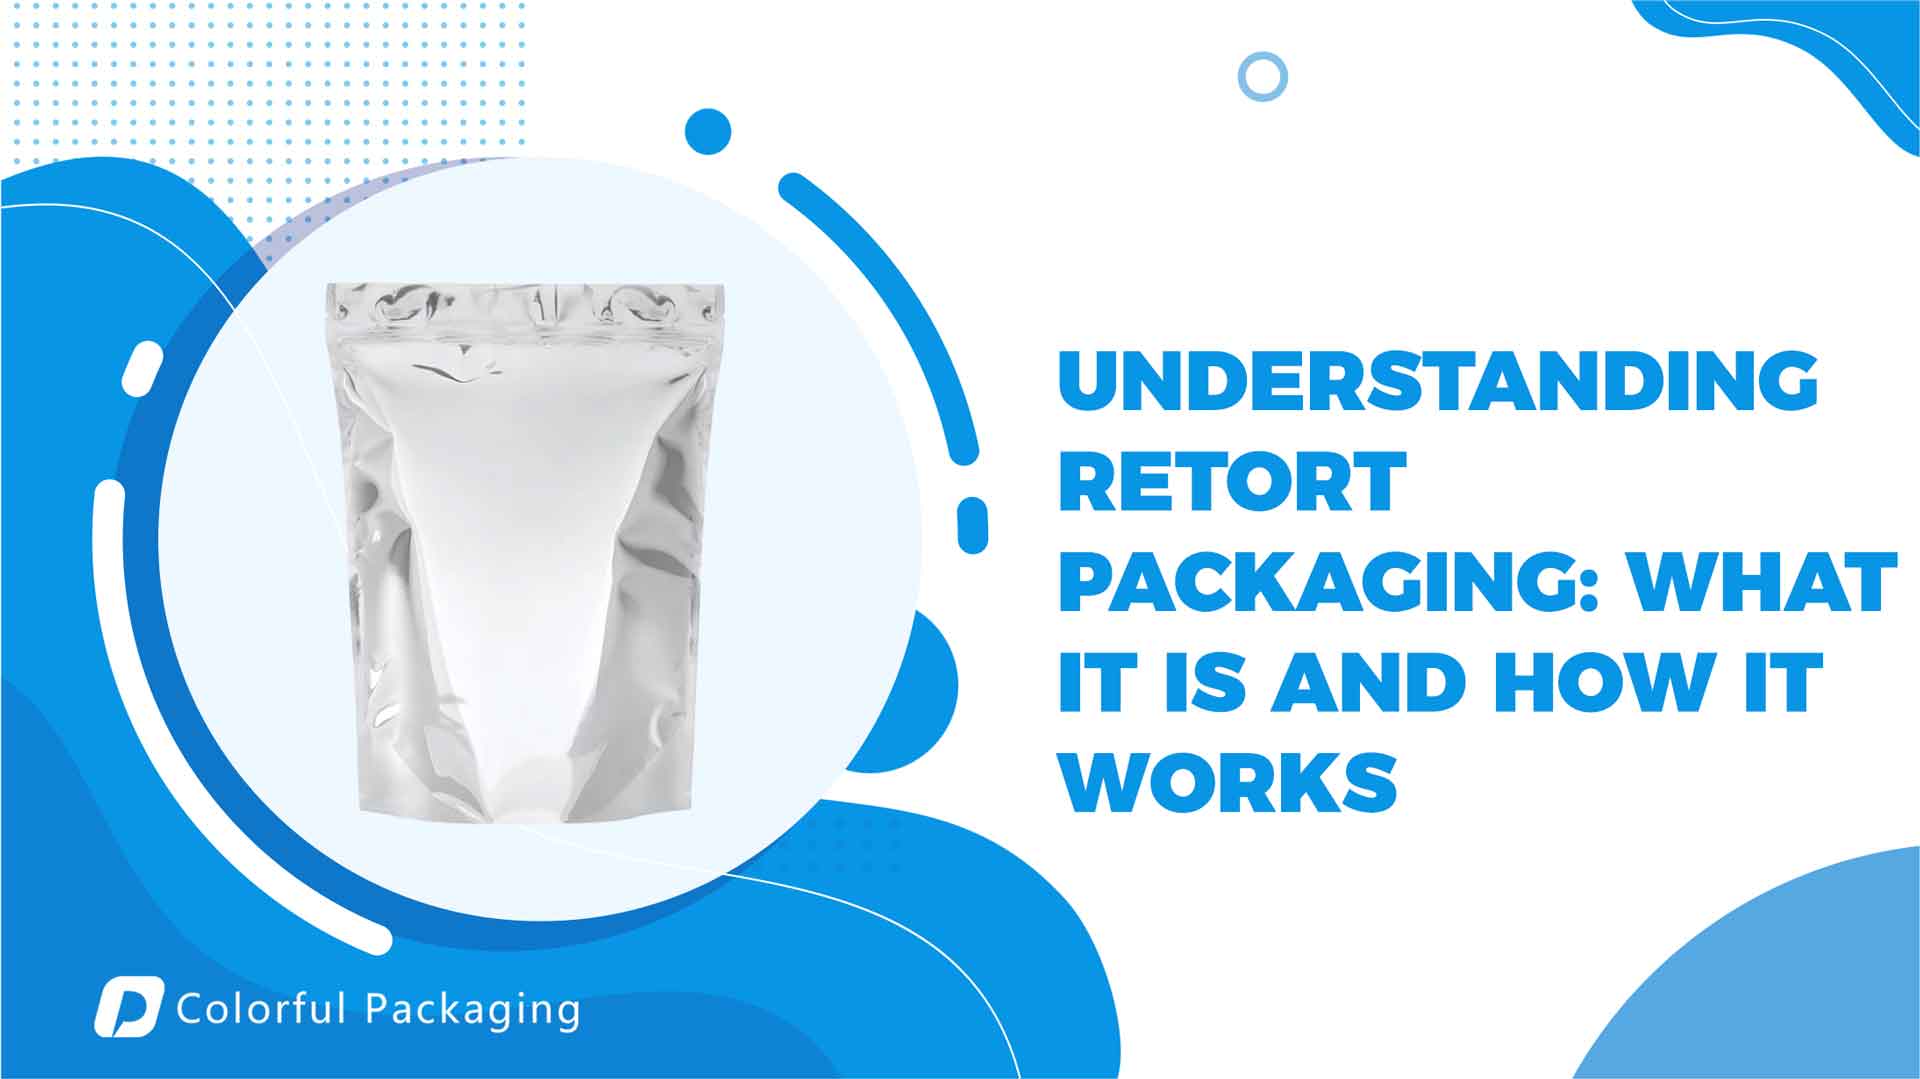 Understanding Retort Packaging: What it is and How it Works